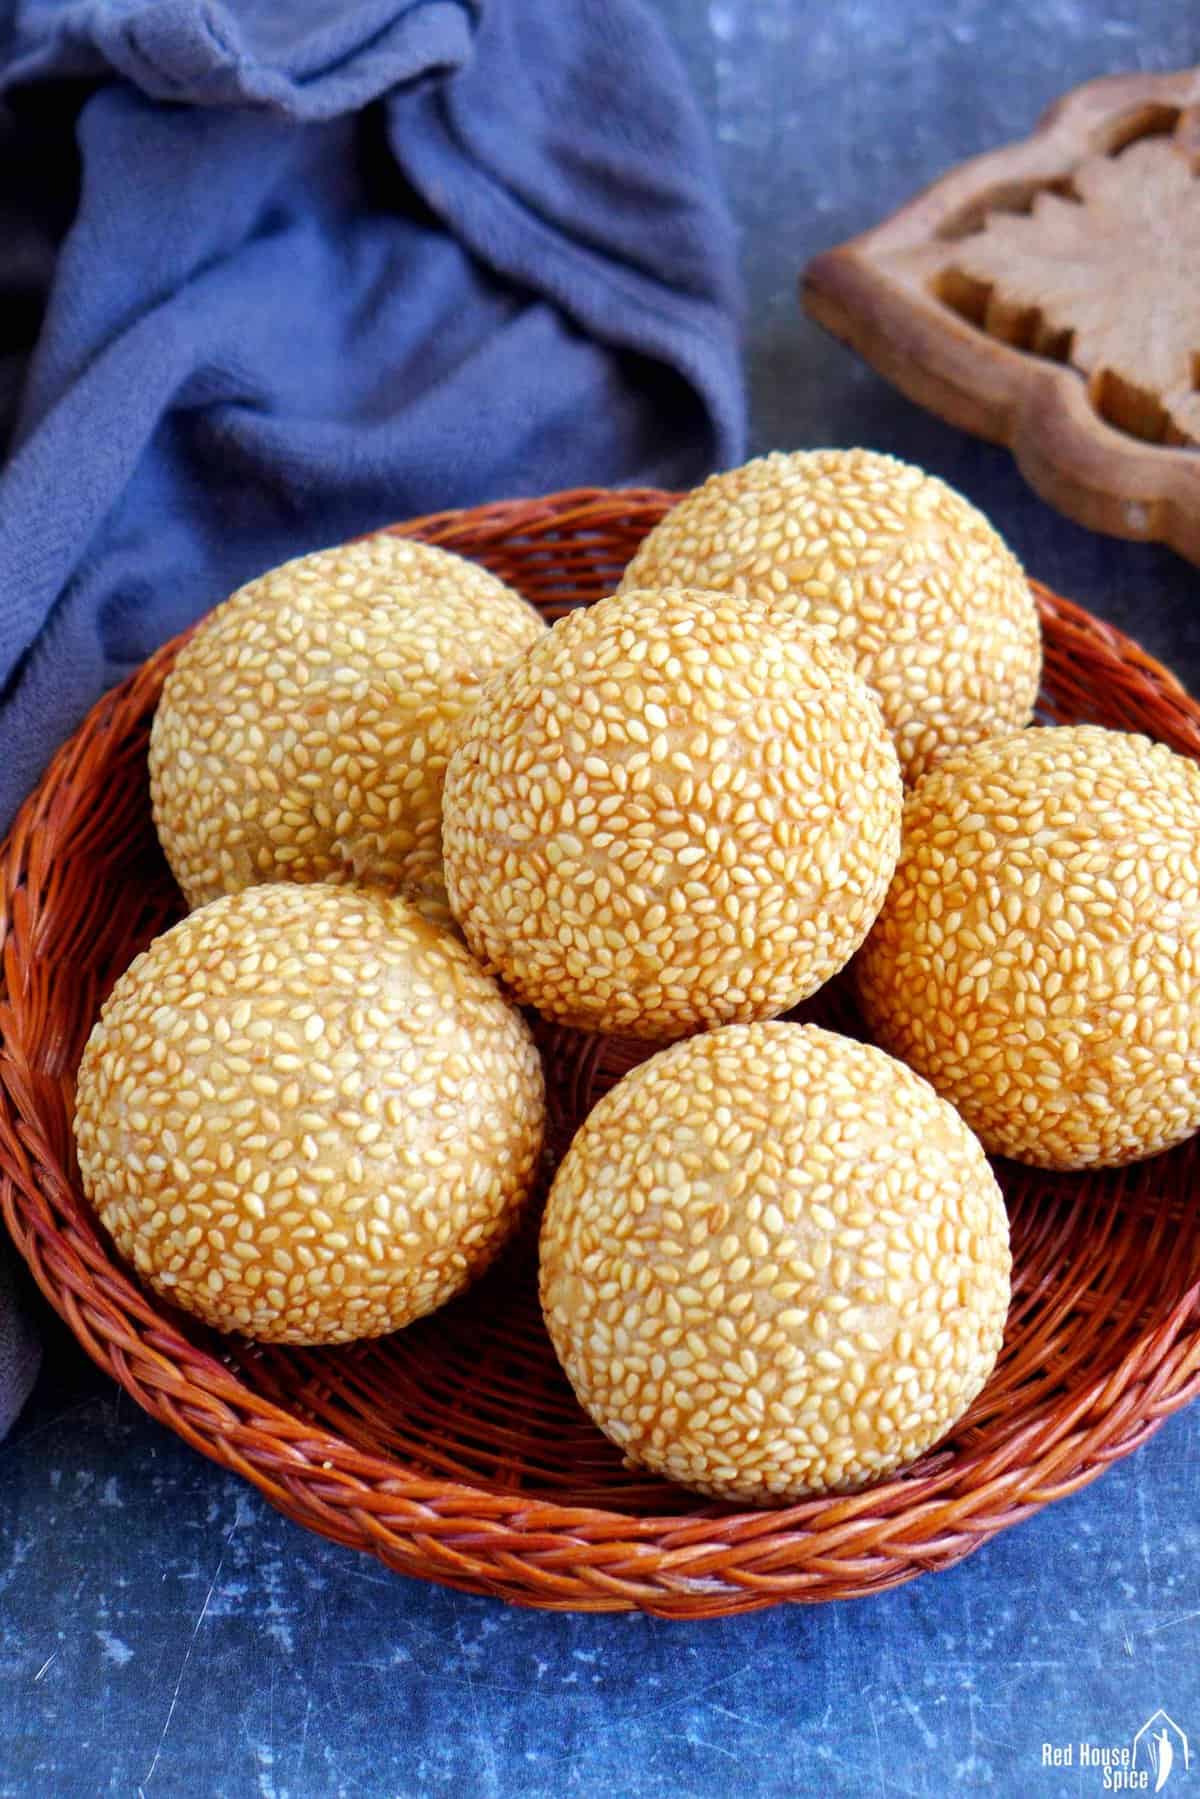 6 sesame balls in a small basket.